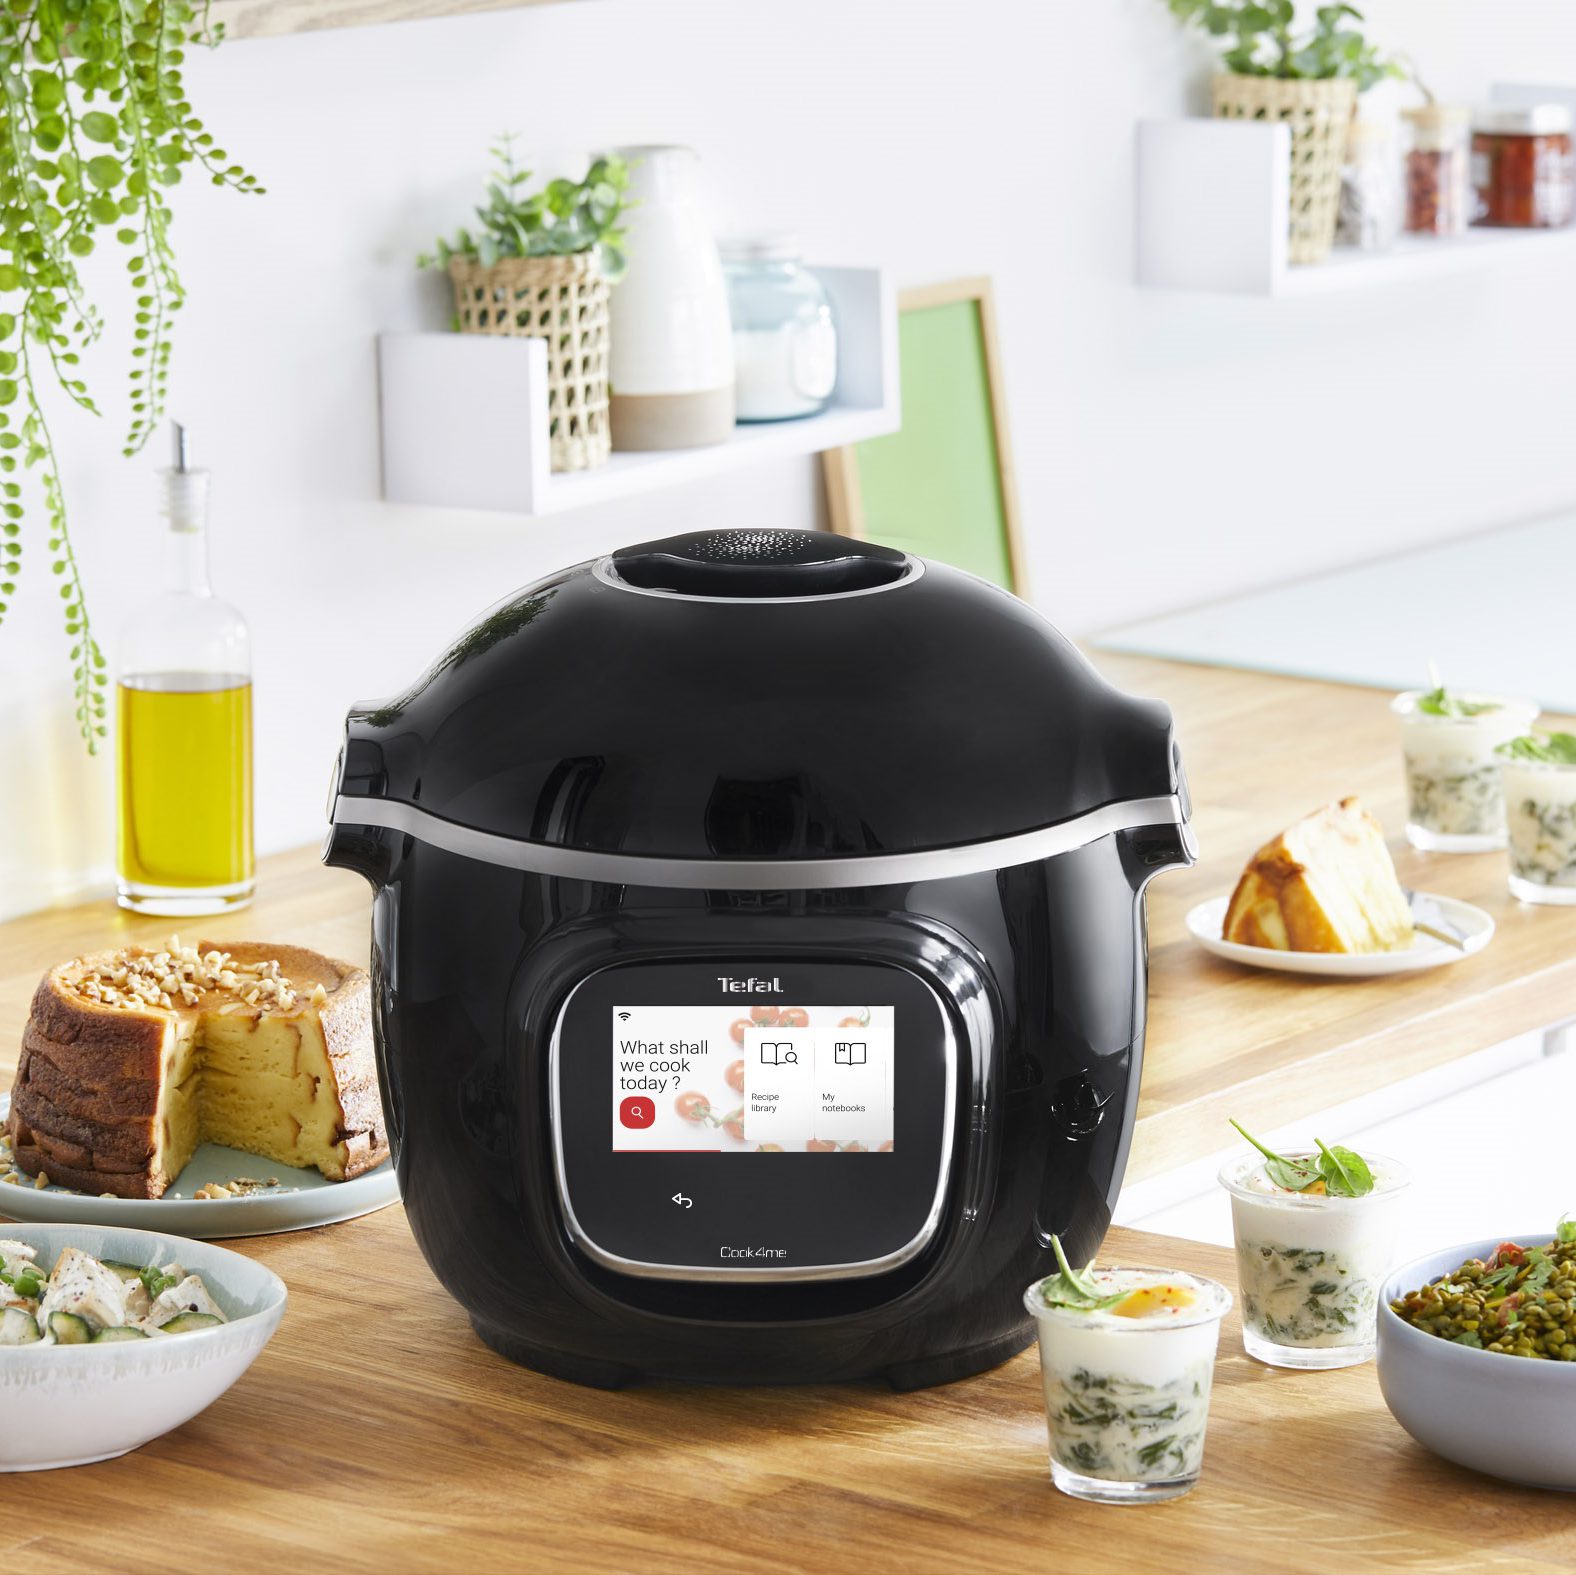 Tefal launches Cook4me Touch Wi-Fi - Appliance Retailer